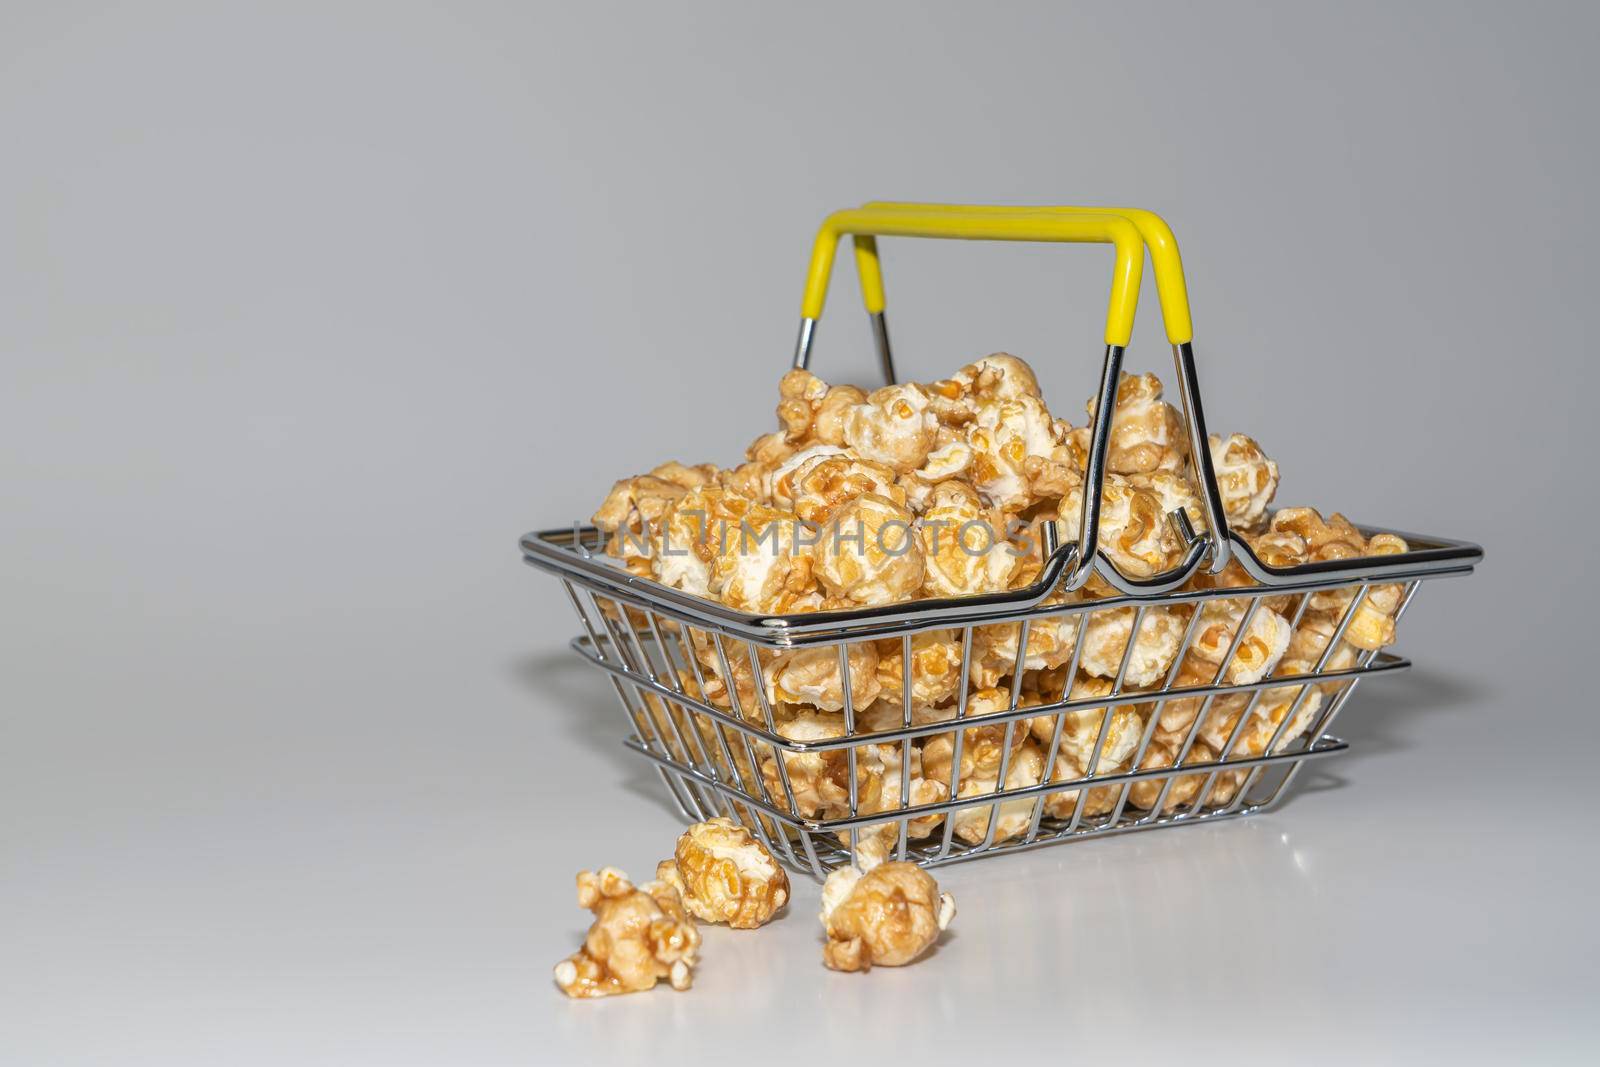 steel supermarket basket with popcorn on a gray background close-up by roman112007